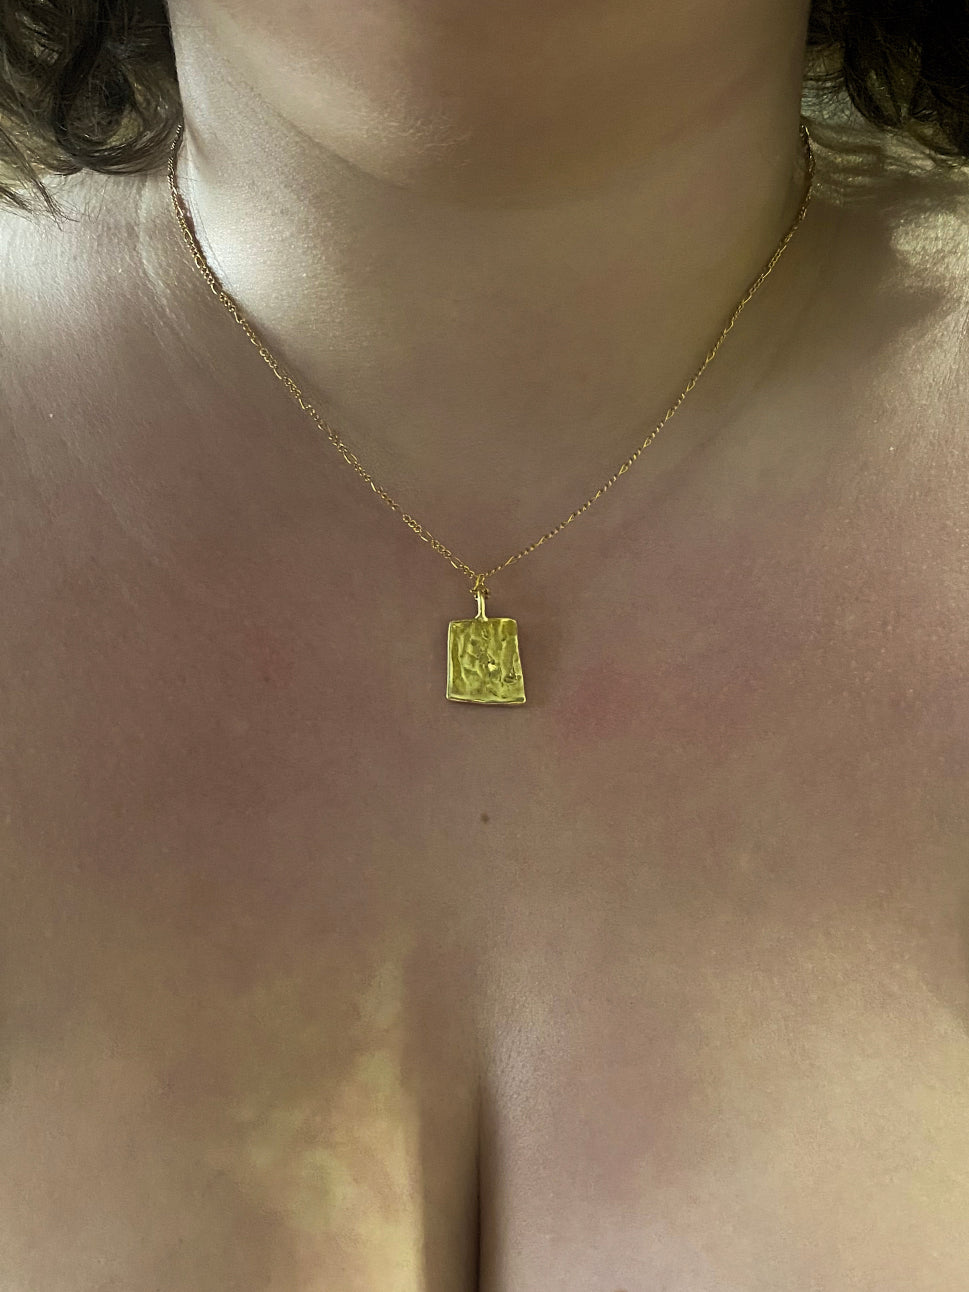 Back of gold rectangular pendant with checker lines on chain